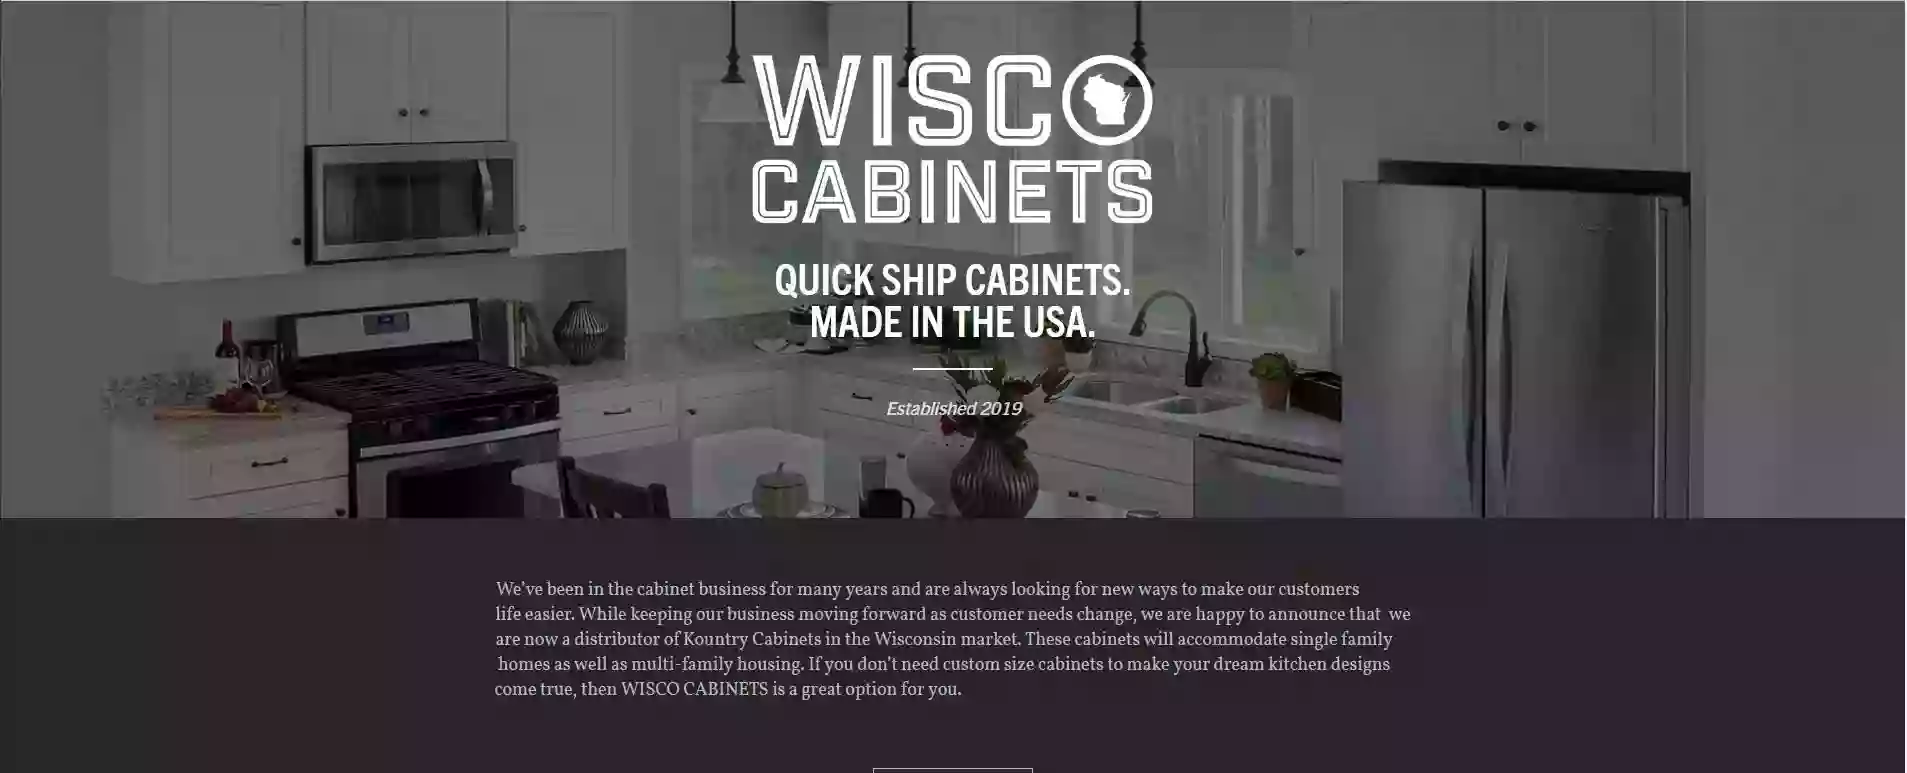 Wisco Cabinets